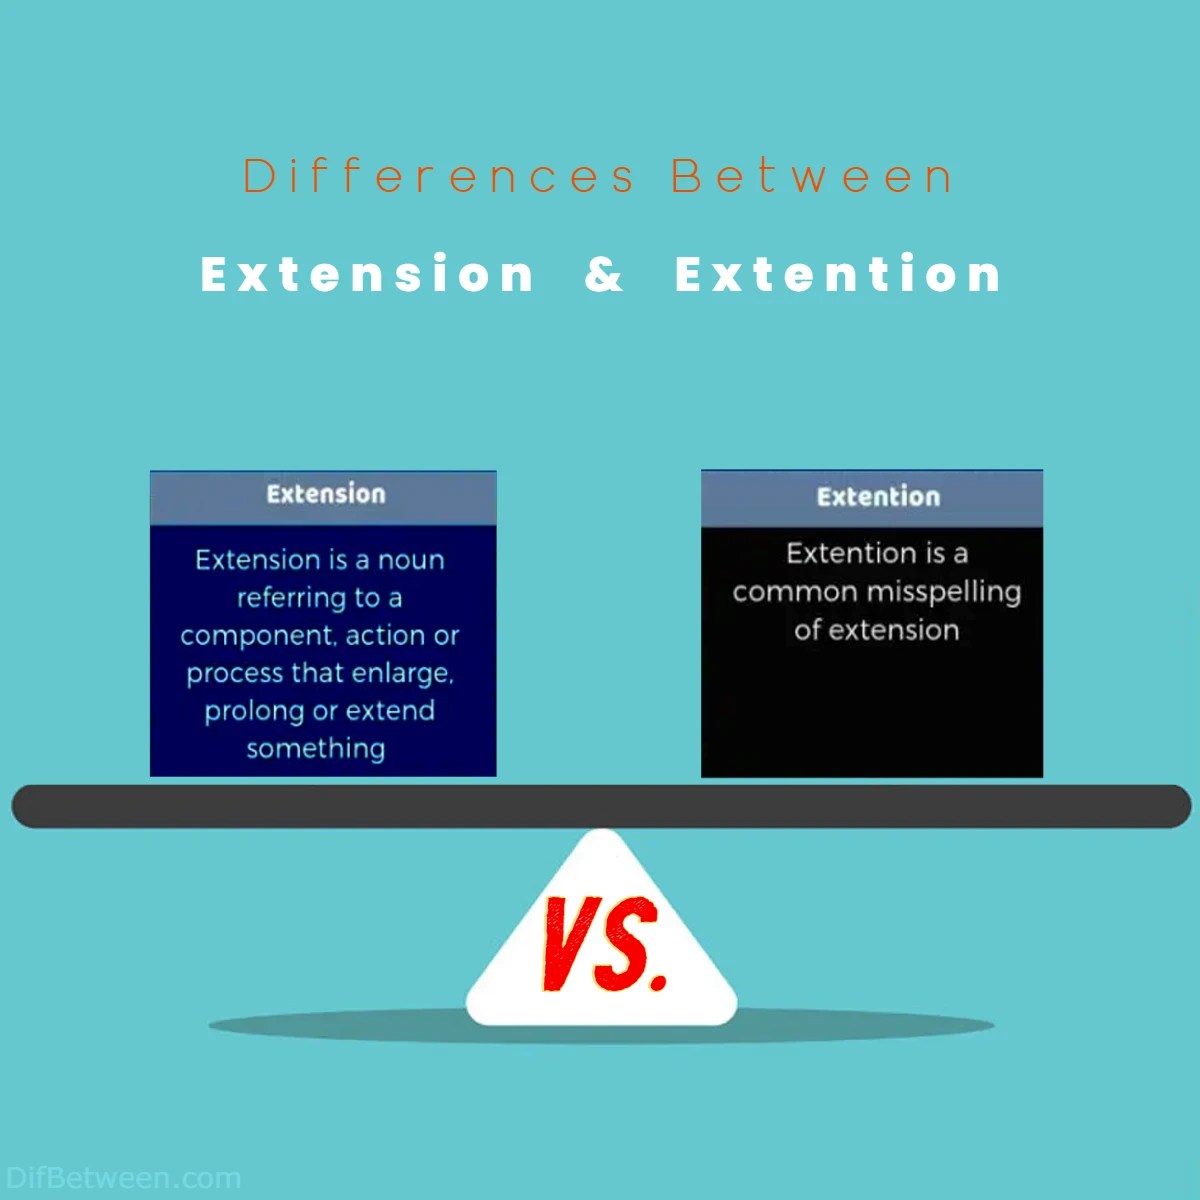 Differences Between Extension vs Extention